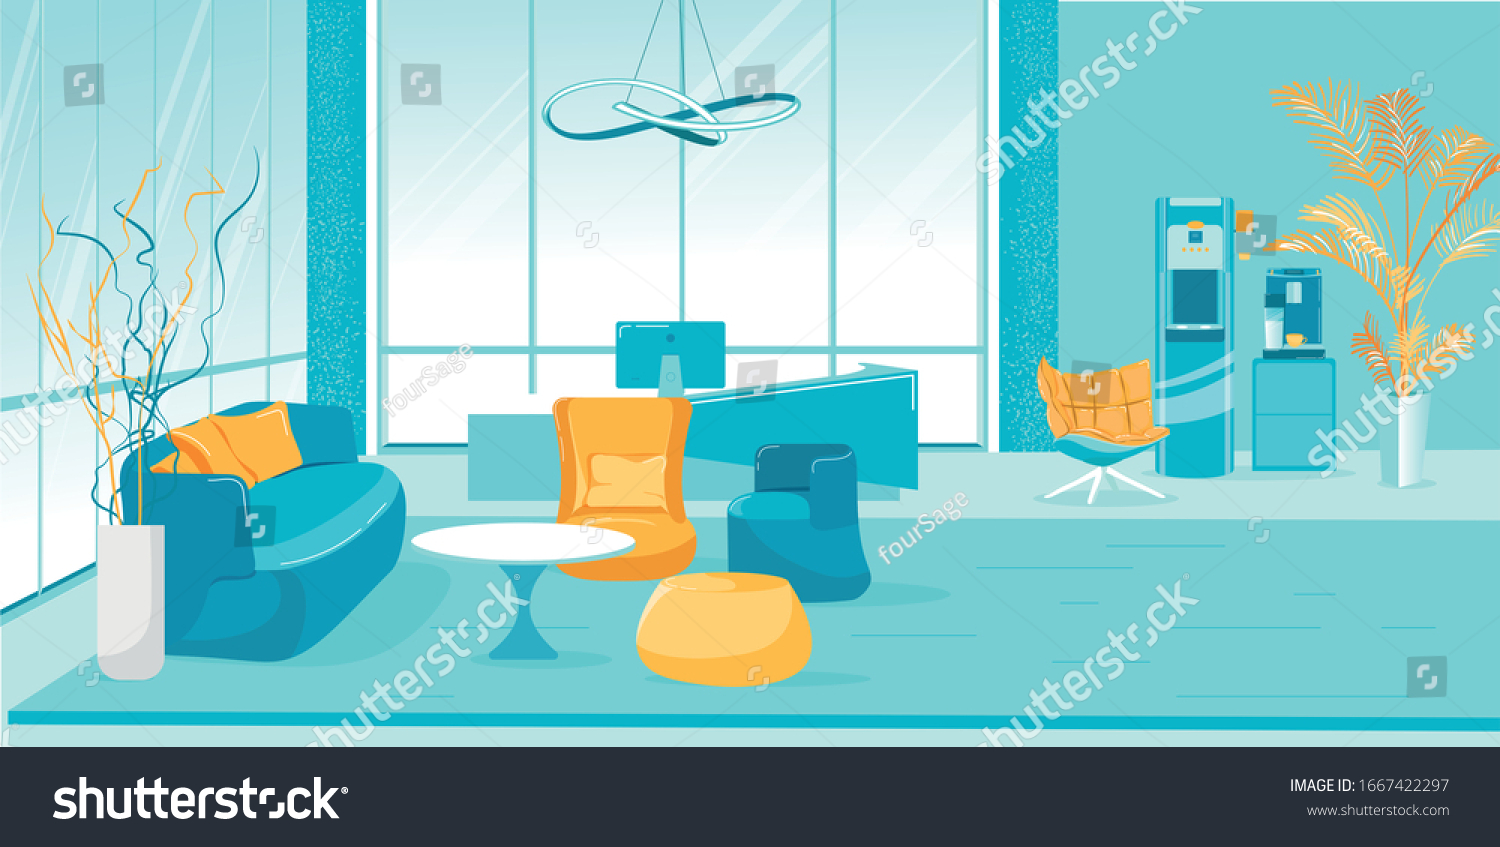 Boss Chief Office Interior in Modern Futuristic Style. Room with Furniture and Coffee Machine, Water Cooler Equipment. Desk with Computer, Chair for Header. Lounge Zone for Guests. Vector Illustration #1667422297